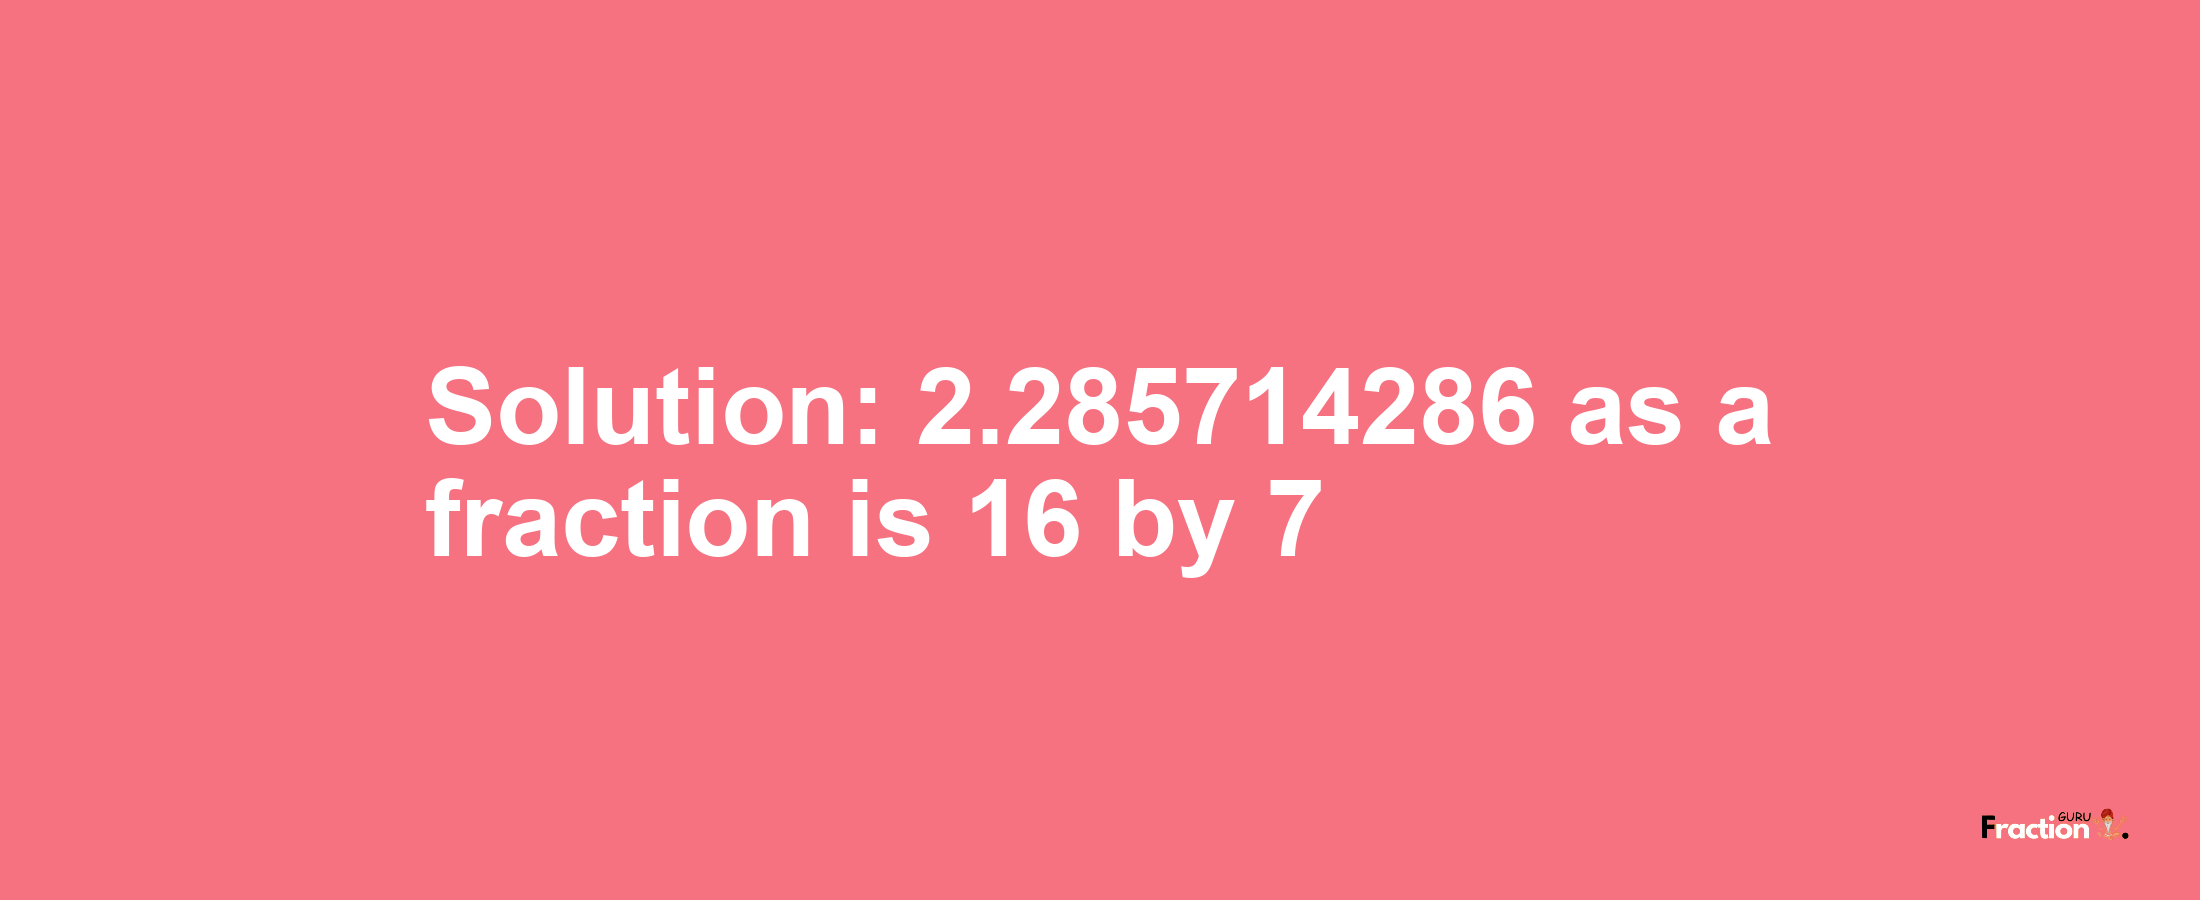 Solution:2.285714286 as a fraction is 16/7